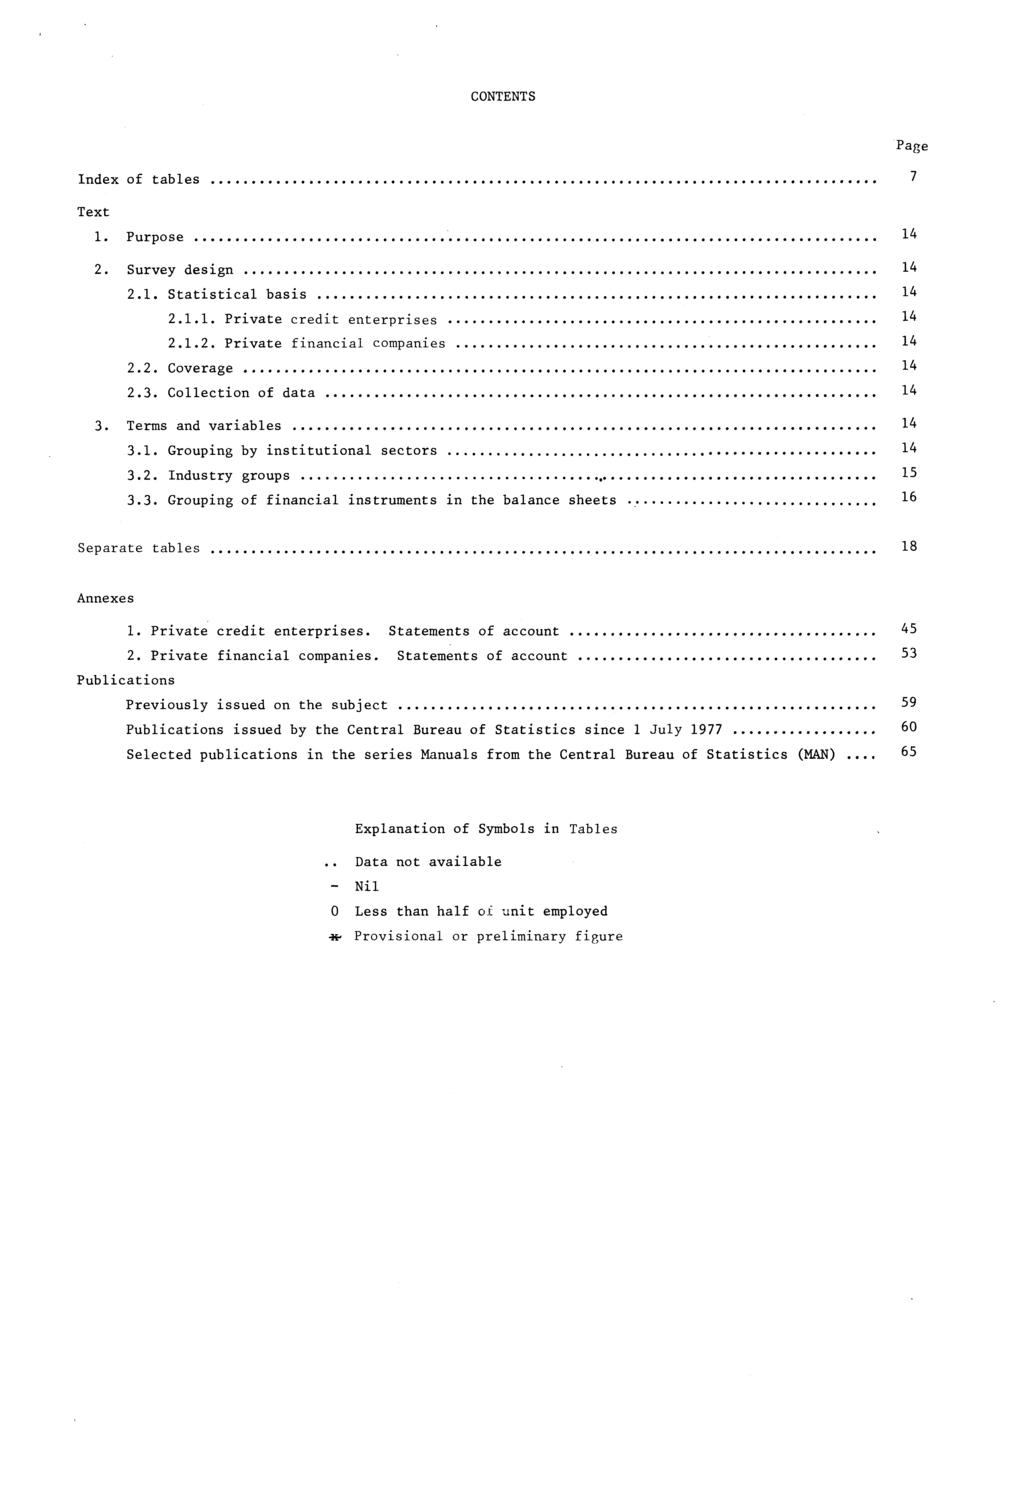 CONTENTS Page Index of tables Text 1. Purpose 7 14 2. Survey design 14 2.1. Statistical basis 14 2.1.1. Private credit enterprises 14 2.1.2. Private financial companies 14 2.2. Coverage 14 2.3.